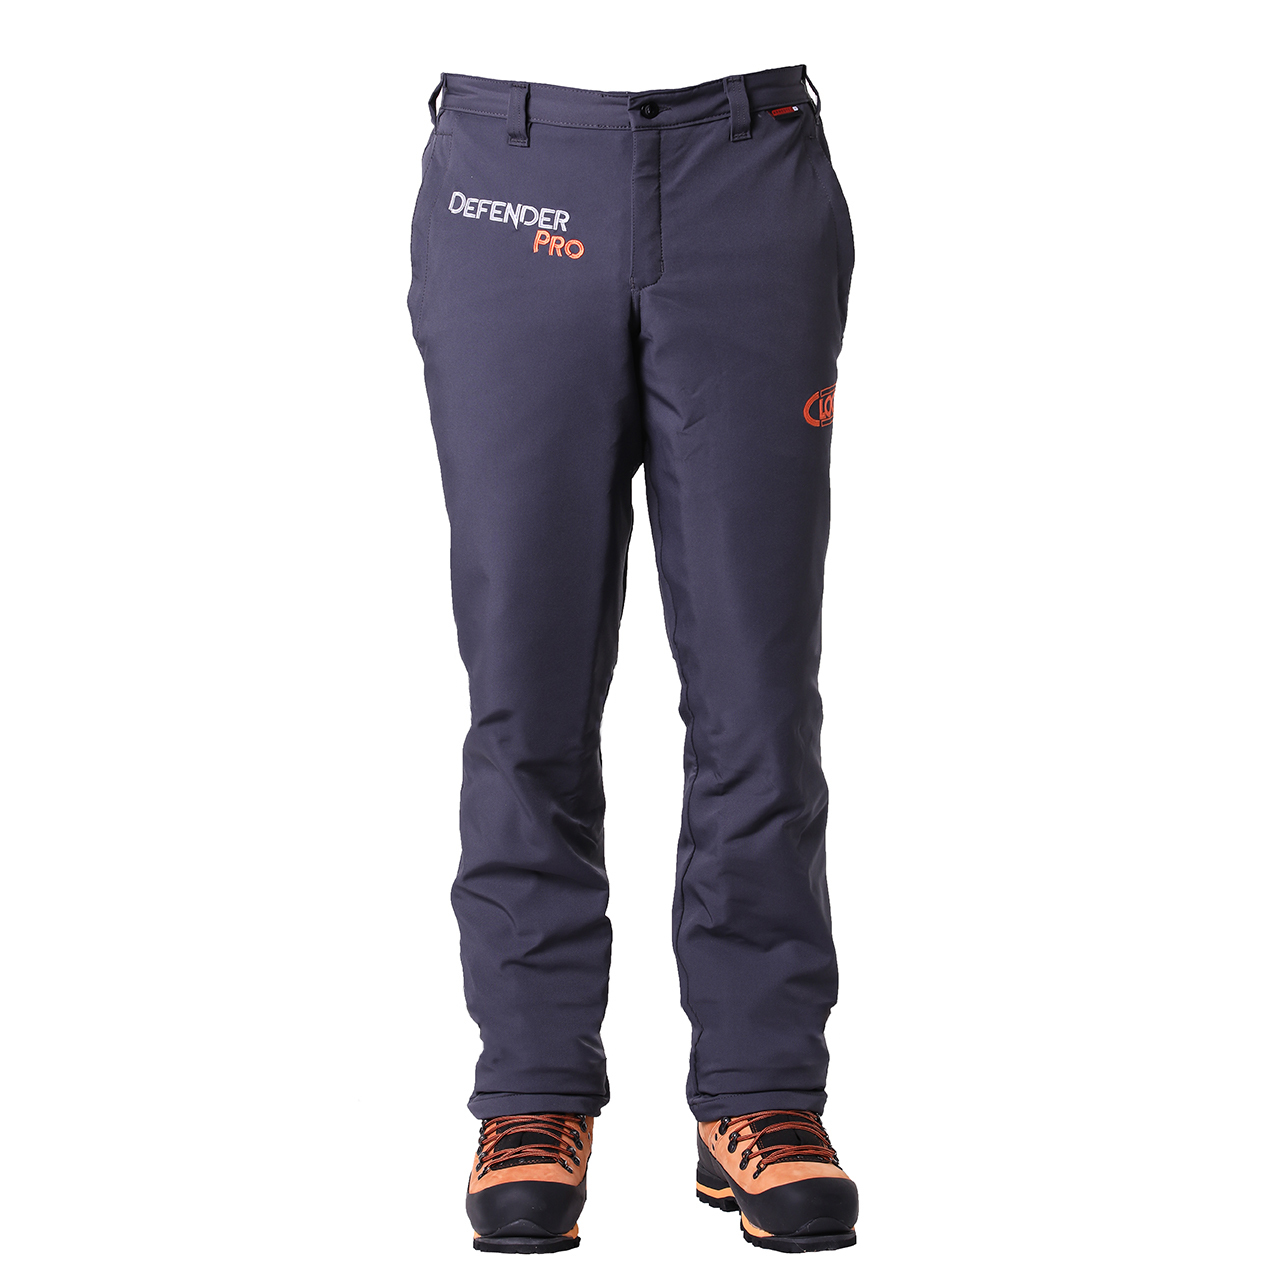 Clogger DefenderPRO Tough UL Chainsaw Pants Now With Zipped Vents